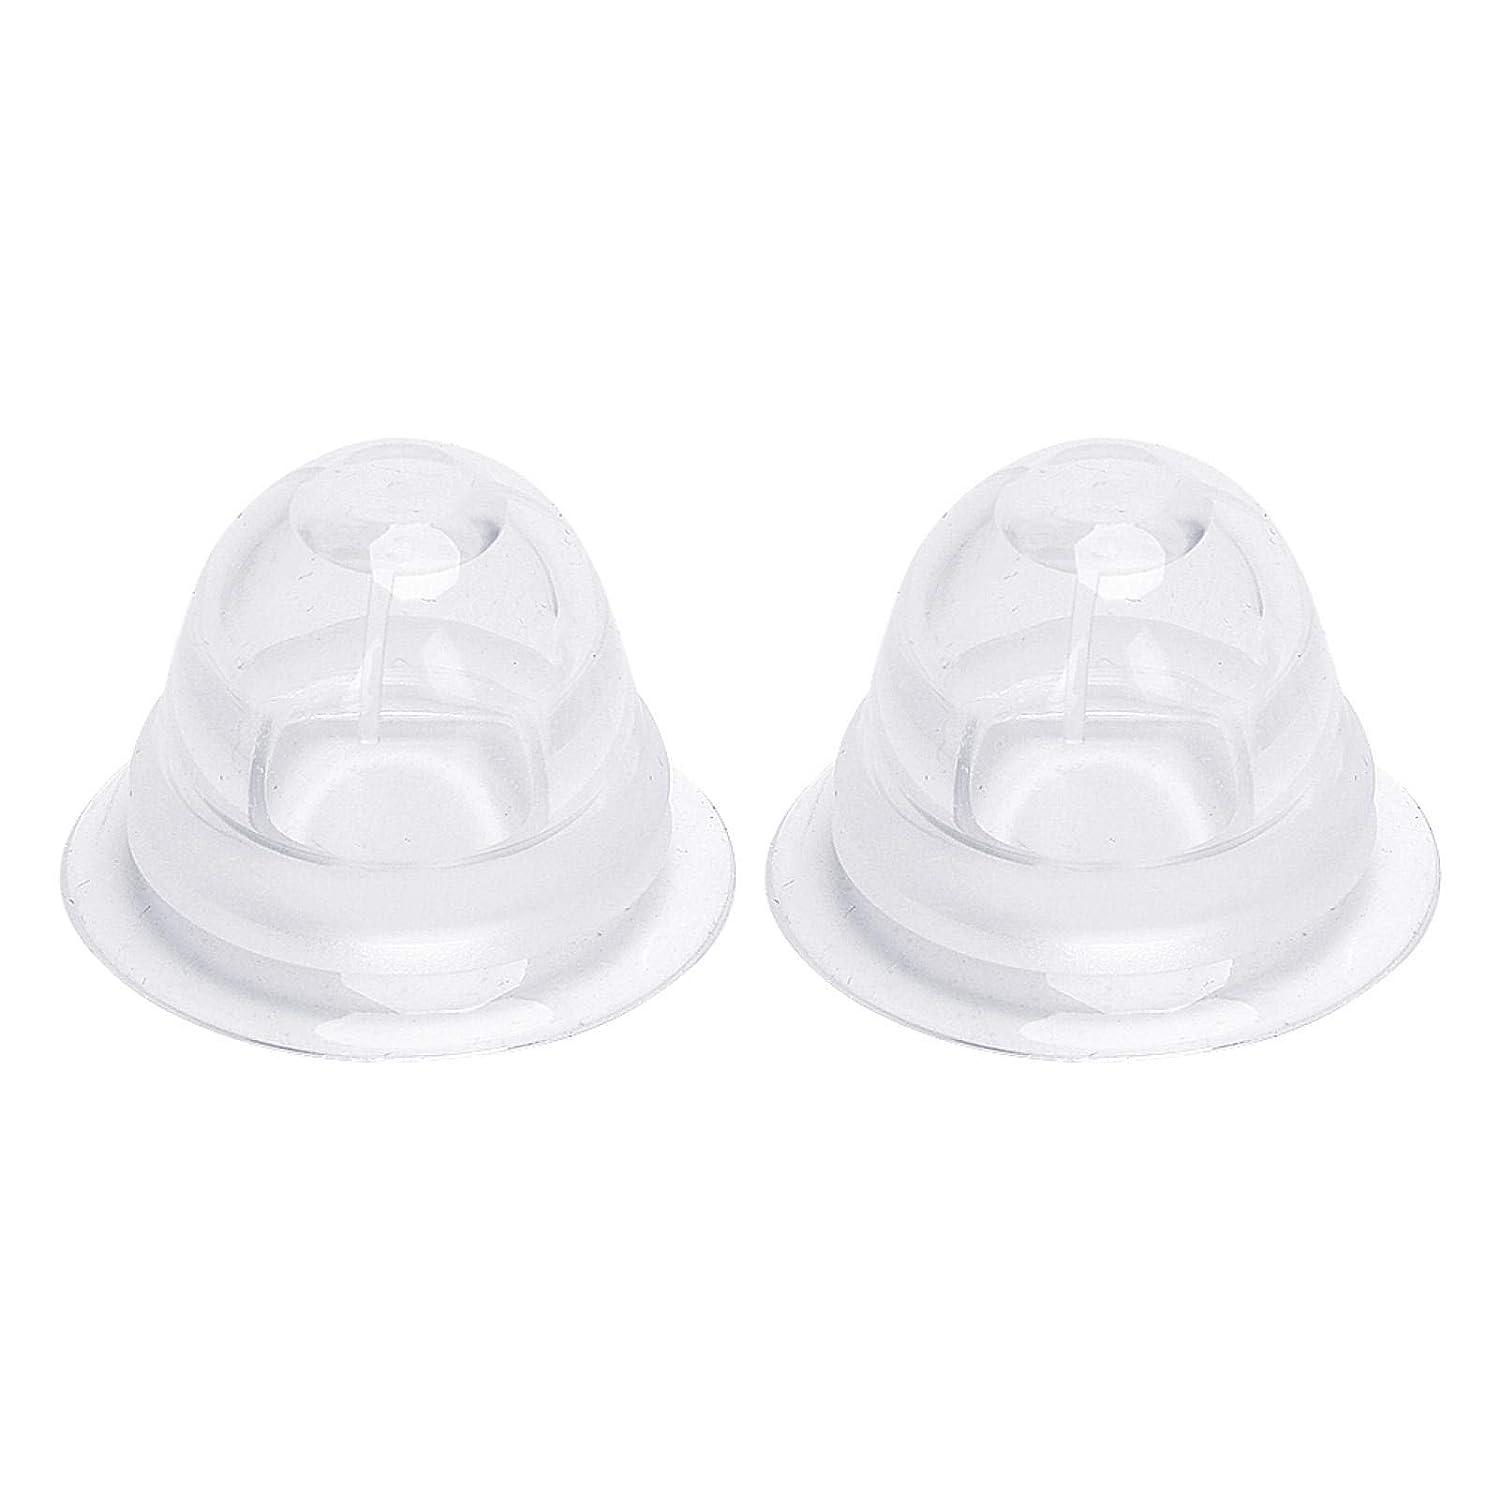 2Pcs Nipple Corrector for Inverted Flat and Shy Nipples Soft Silica Gel Nipple  Therapy Products Nipple Pullers Mammy Breastfeeding Tools Newborn